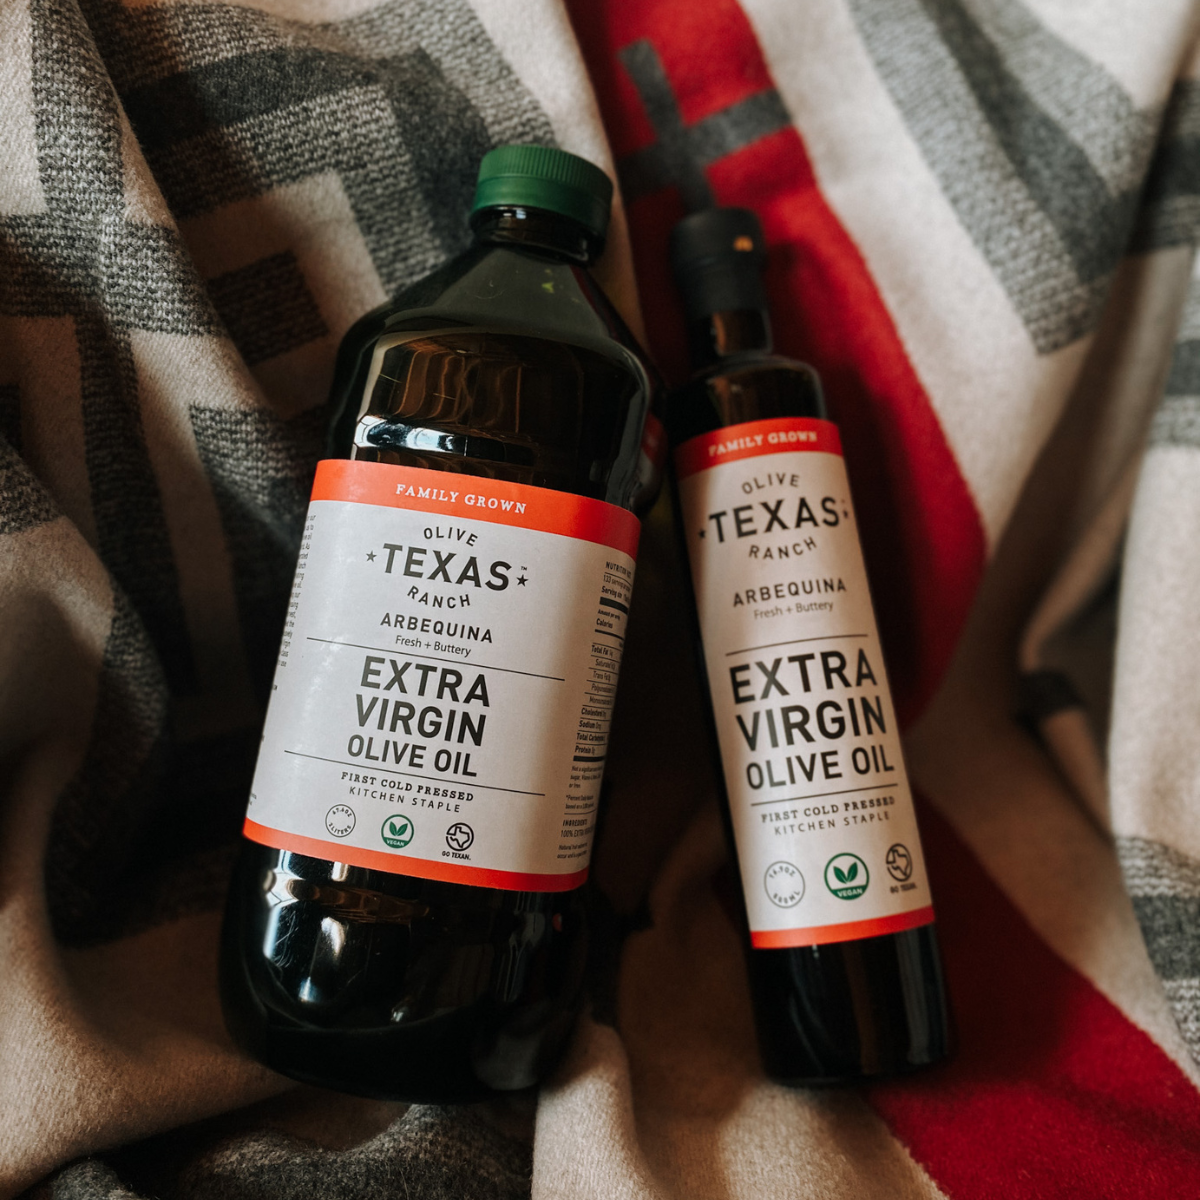 Kitchen_Staple_Everyday_Olive_Oil_Extra_Virgin_Arbequina_Olive_Oil_-_Best_Texas_Olive_Oil_Made_By_Family_Farmers_1_97456999-2c97-45d9-af6f-8d9ff8a7193d.png